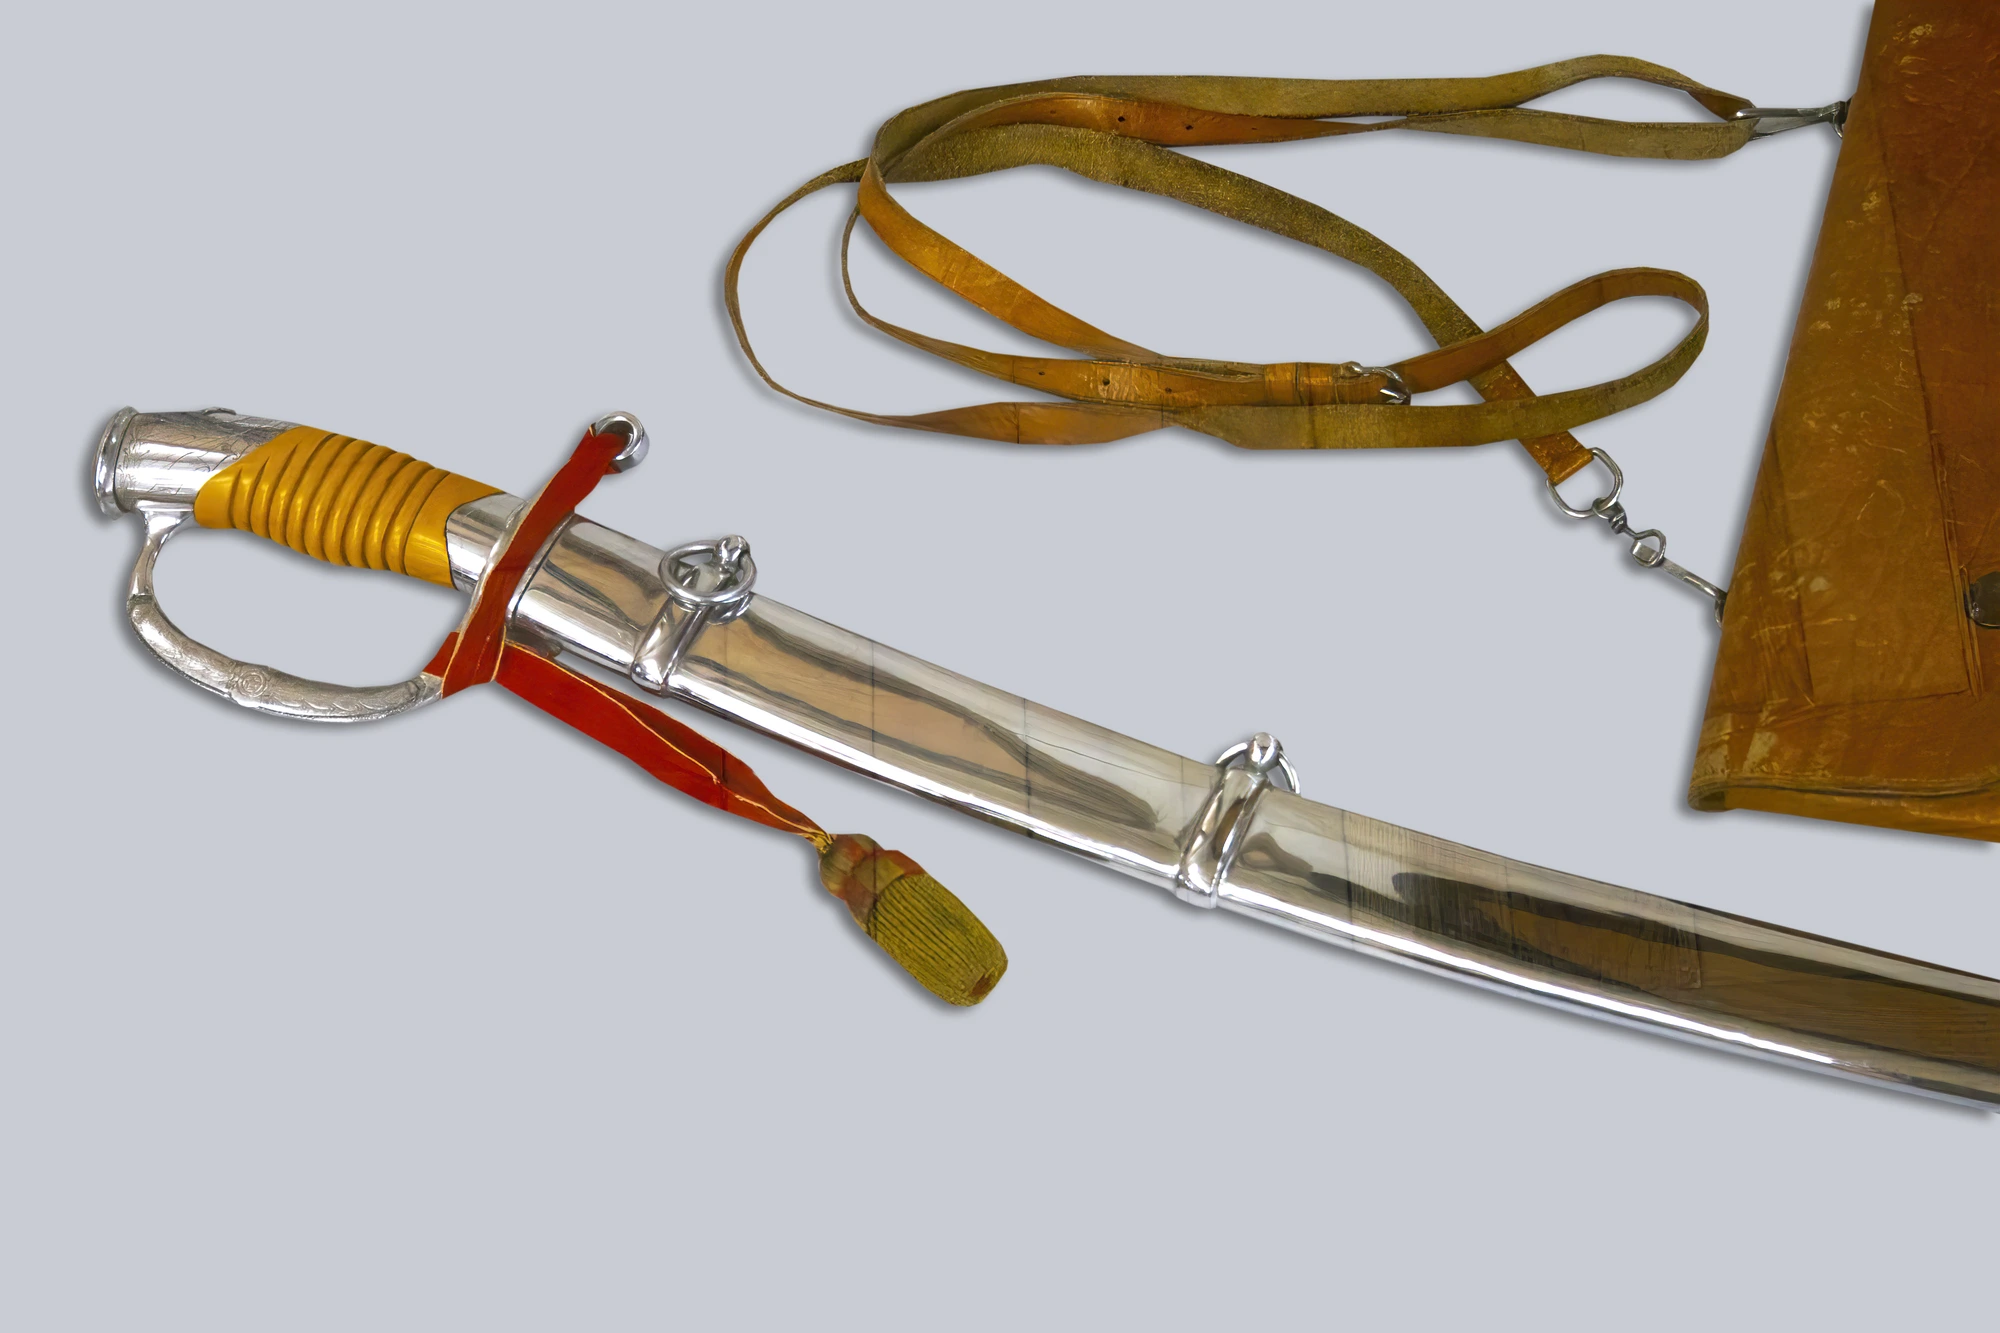 A sabre with a polished blade and scabbard, featuring an ornately decorated handle, displayed against a neutral background.